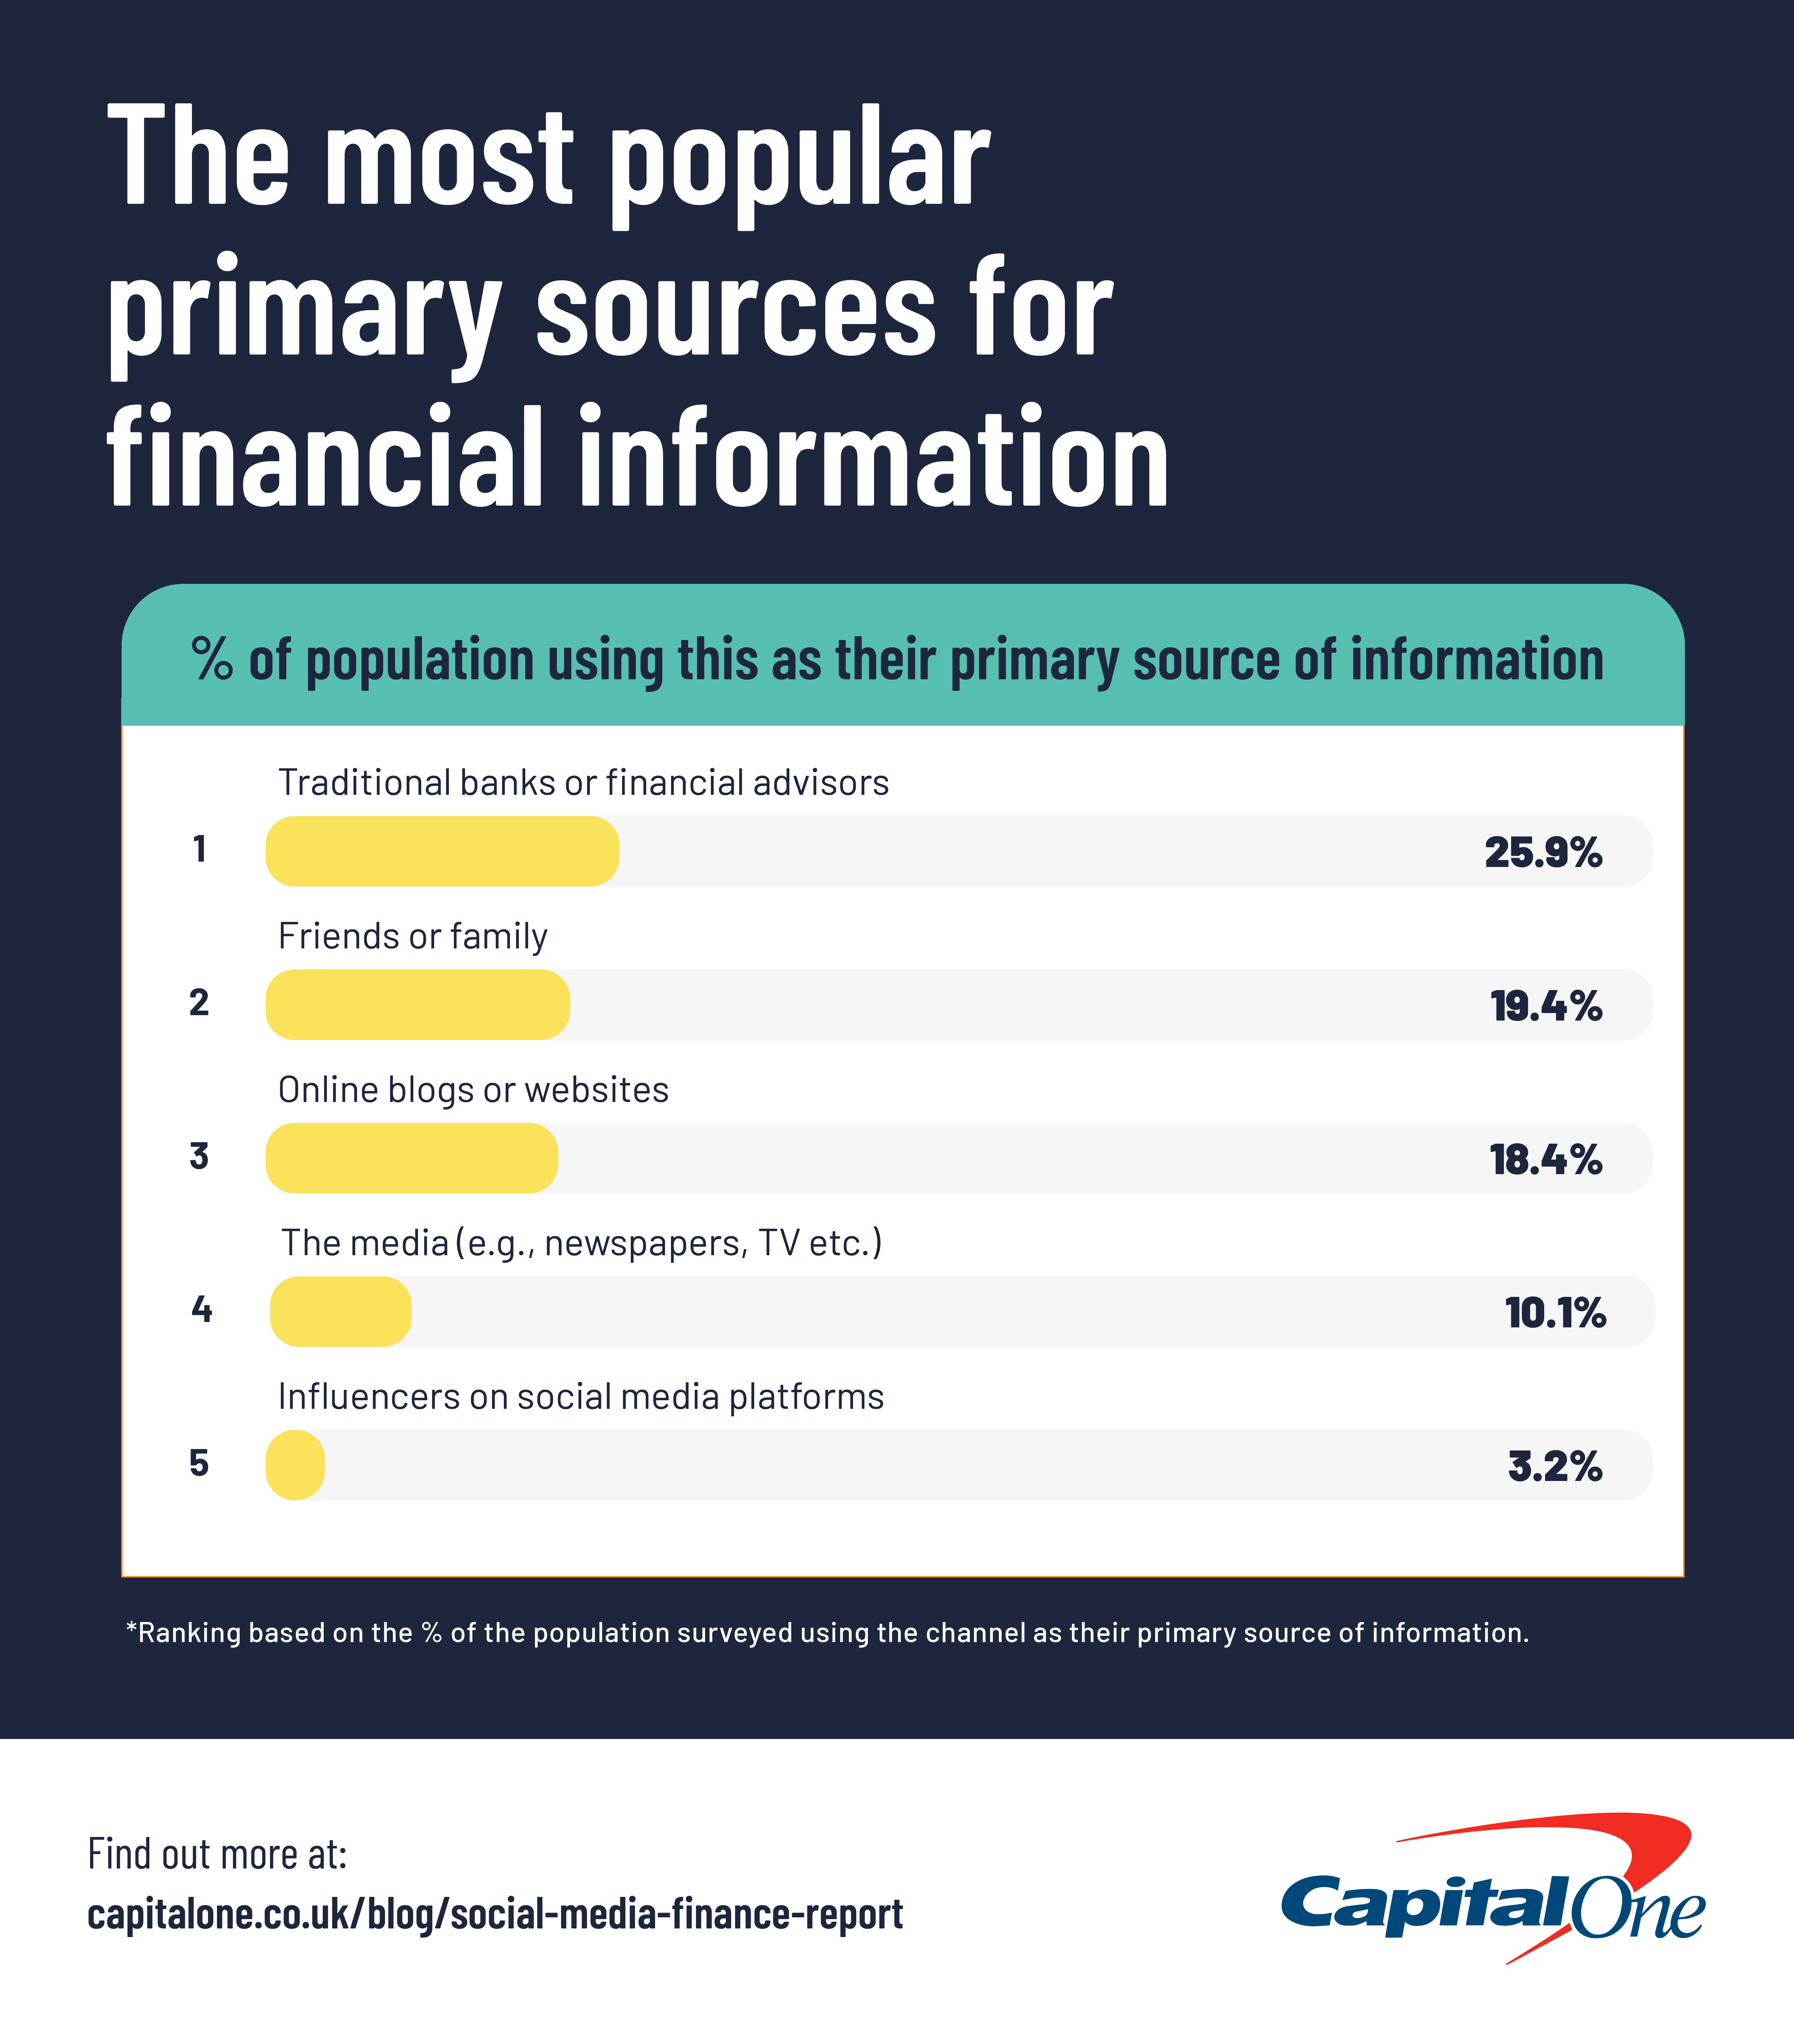 Diagram showing the breakdown of the most popular primary sources for financial information